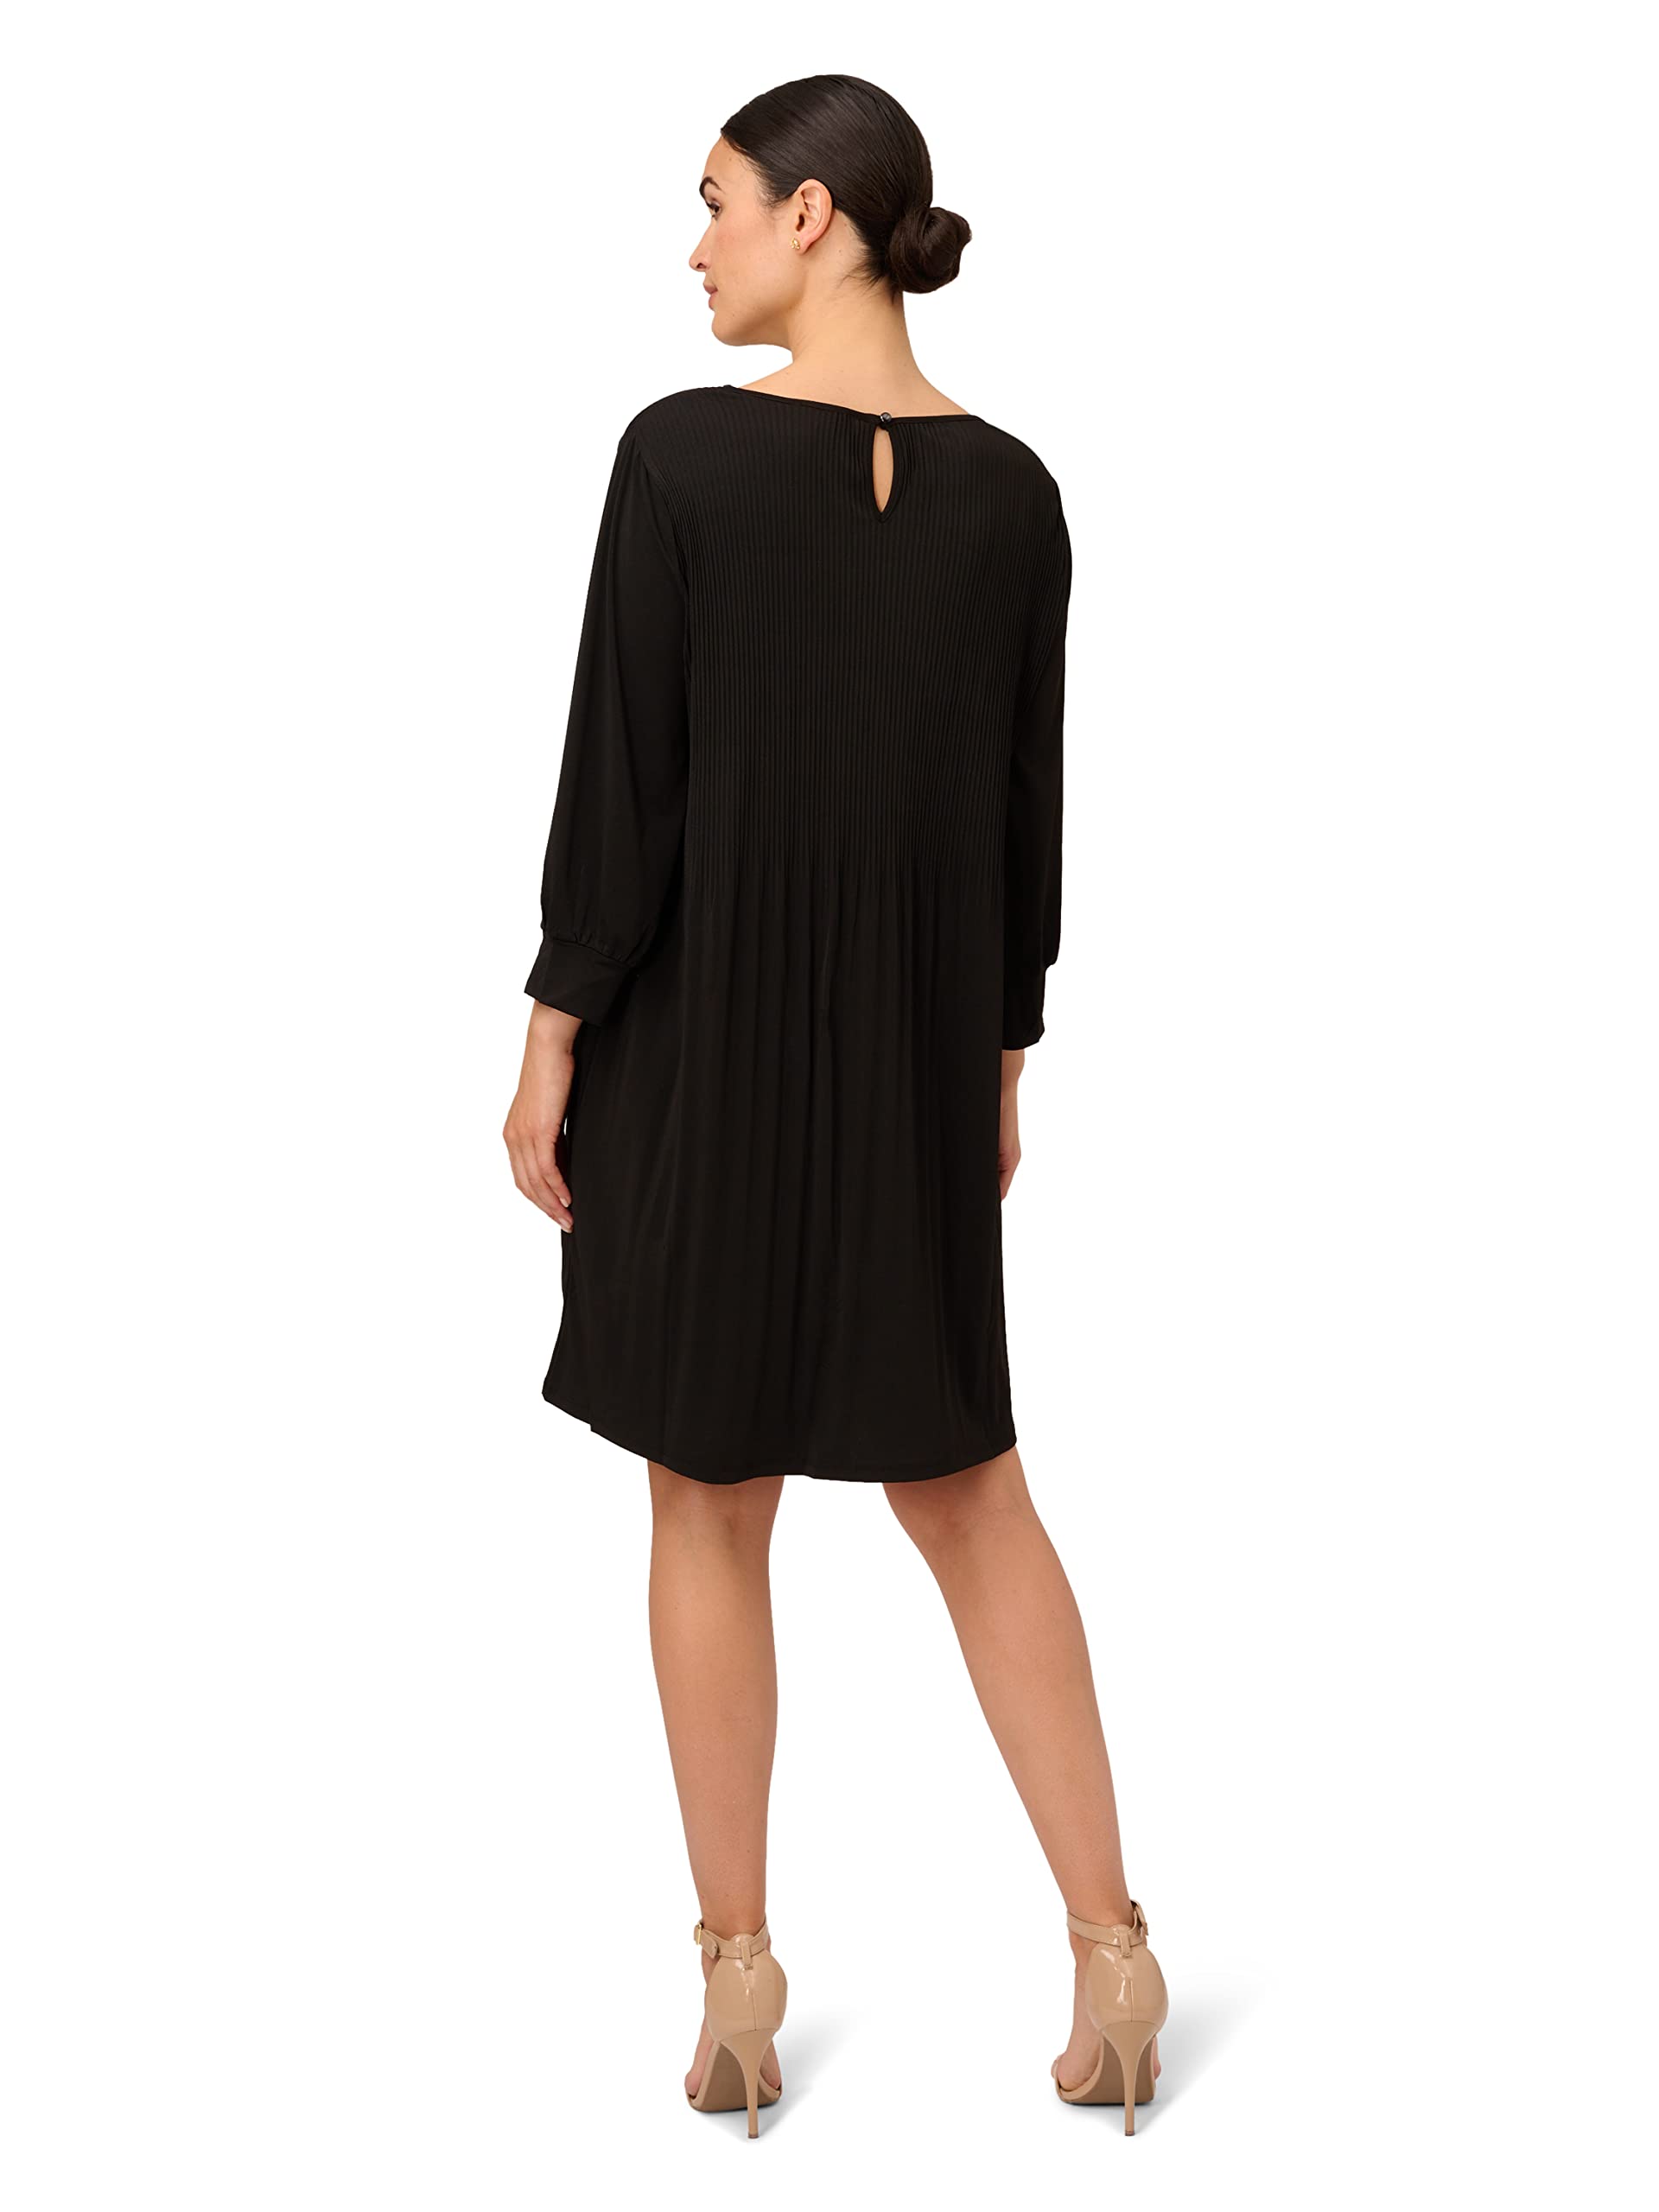 Adrianna Papell Women's Pleated Knit Crew Neck Dress